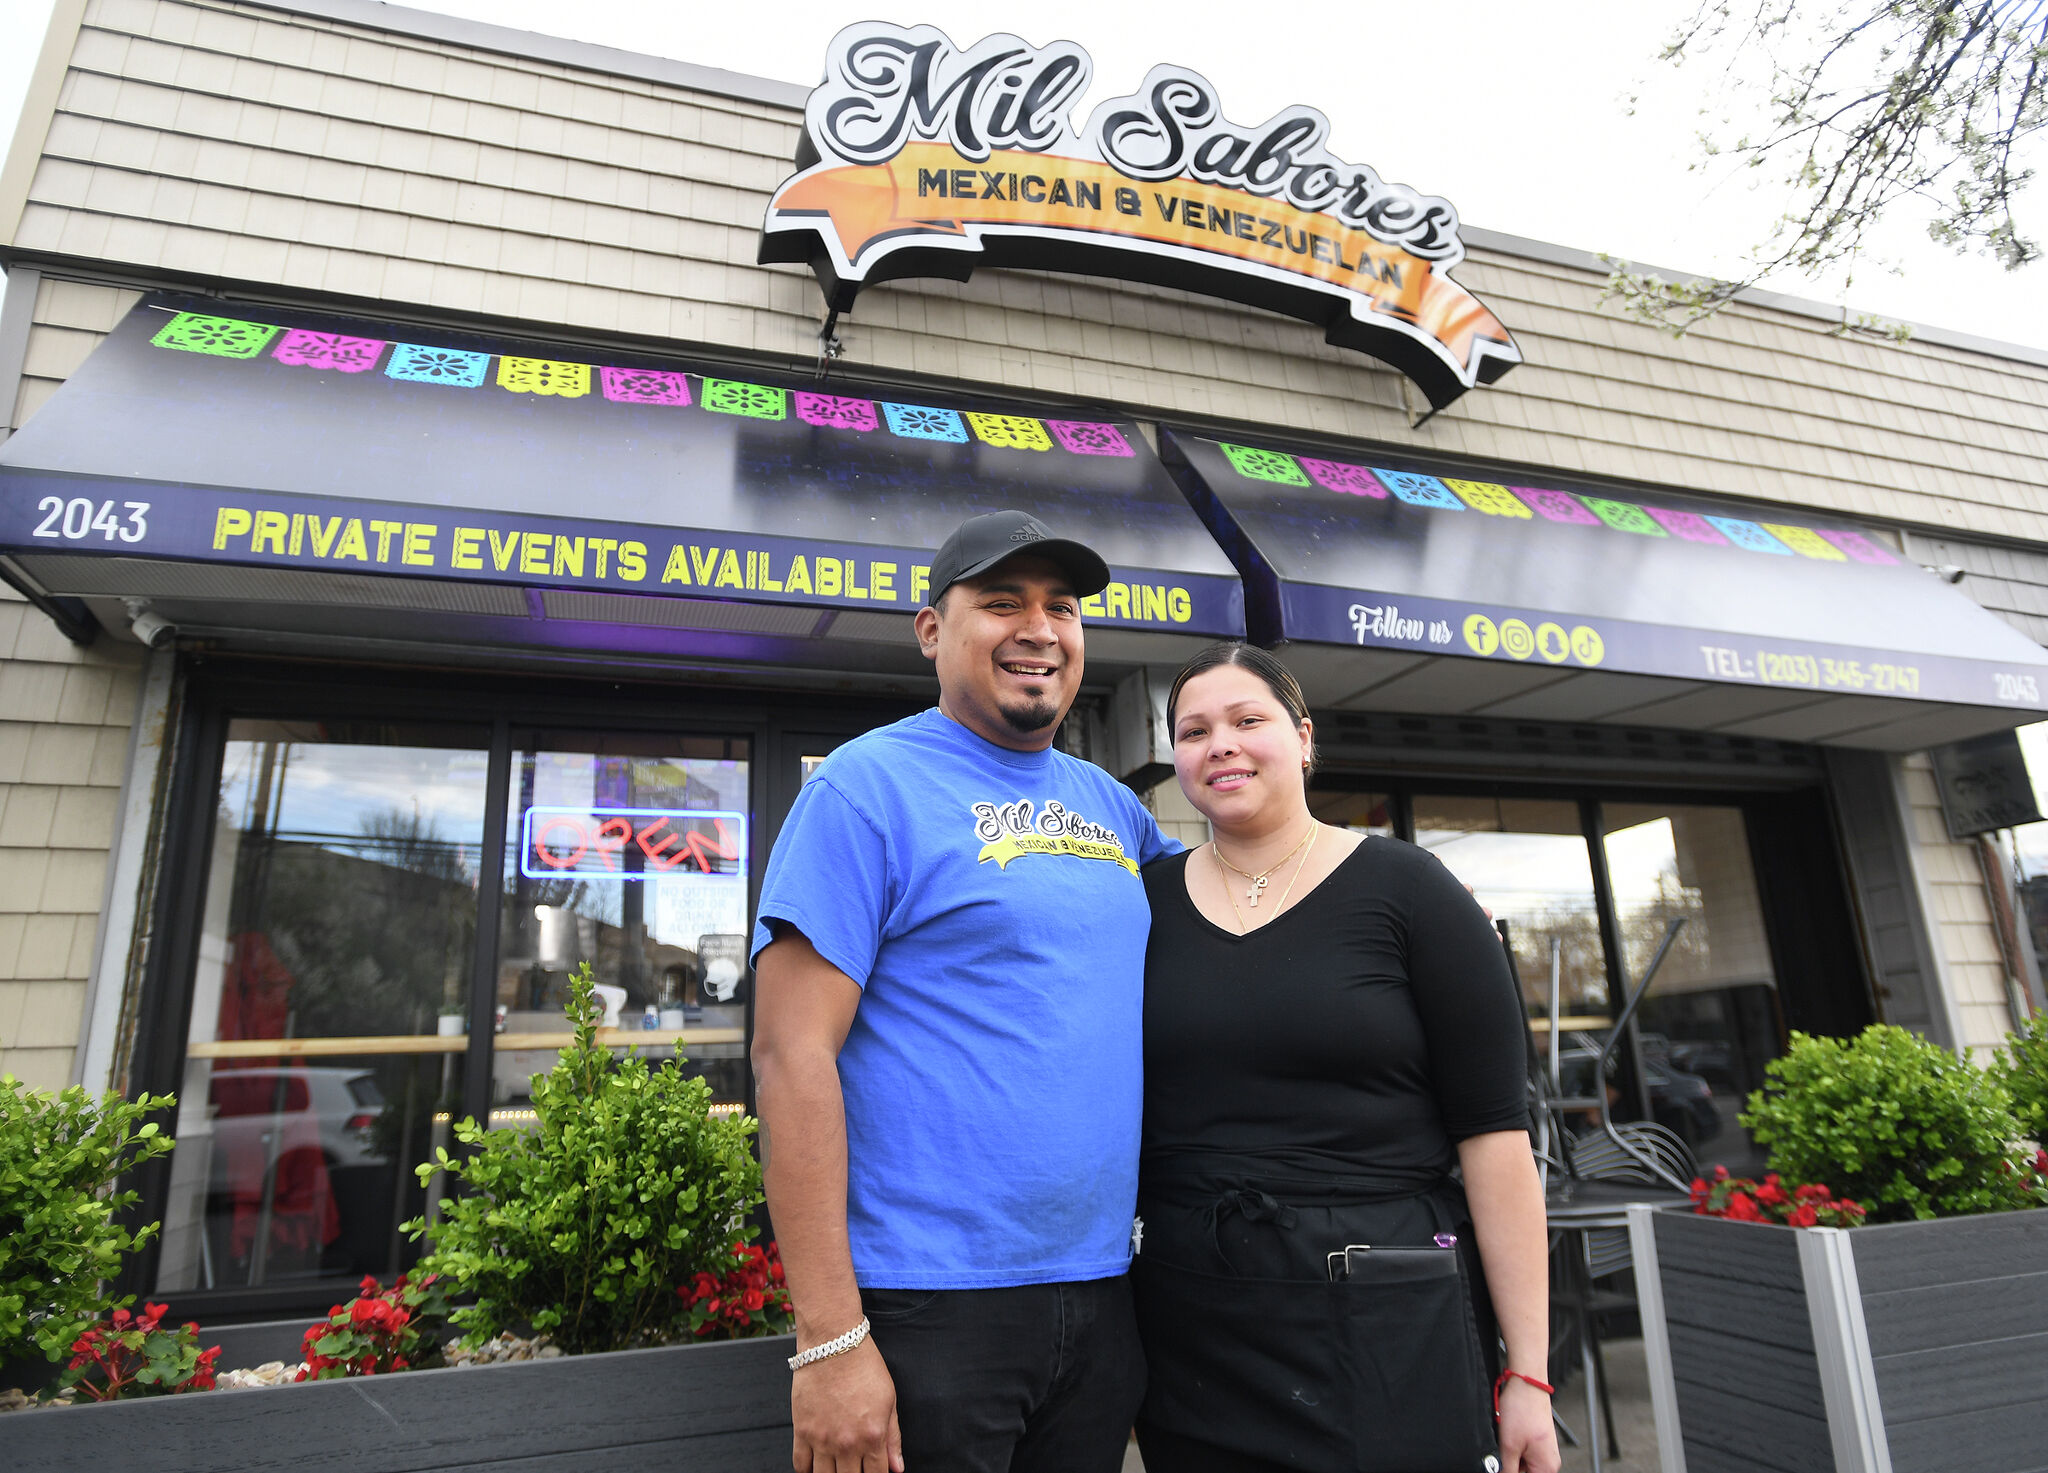 MilSabores taco truck on hold, but Bridgeport cafe is open up